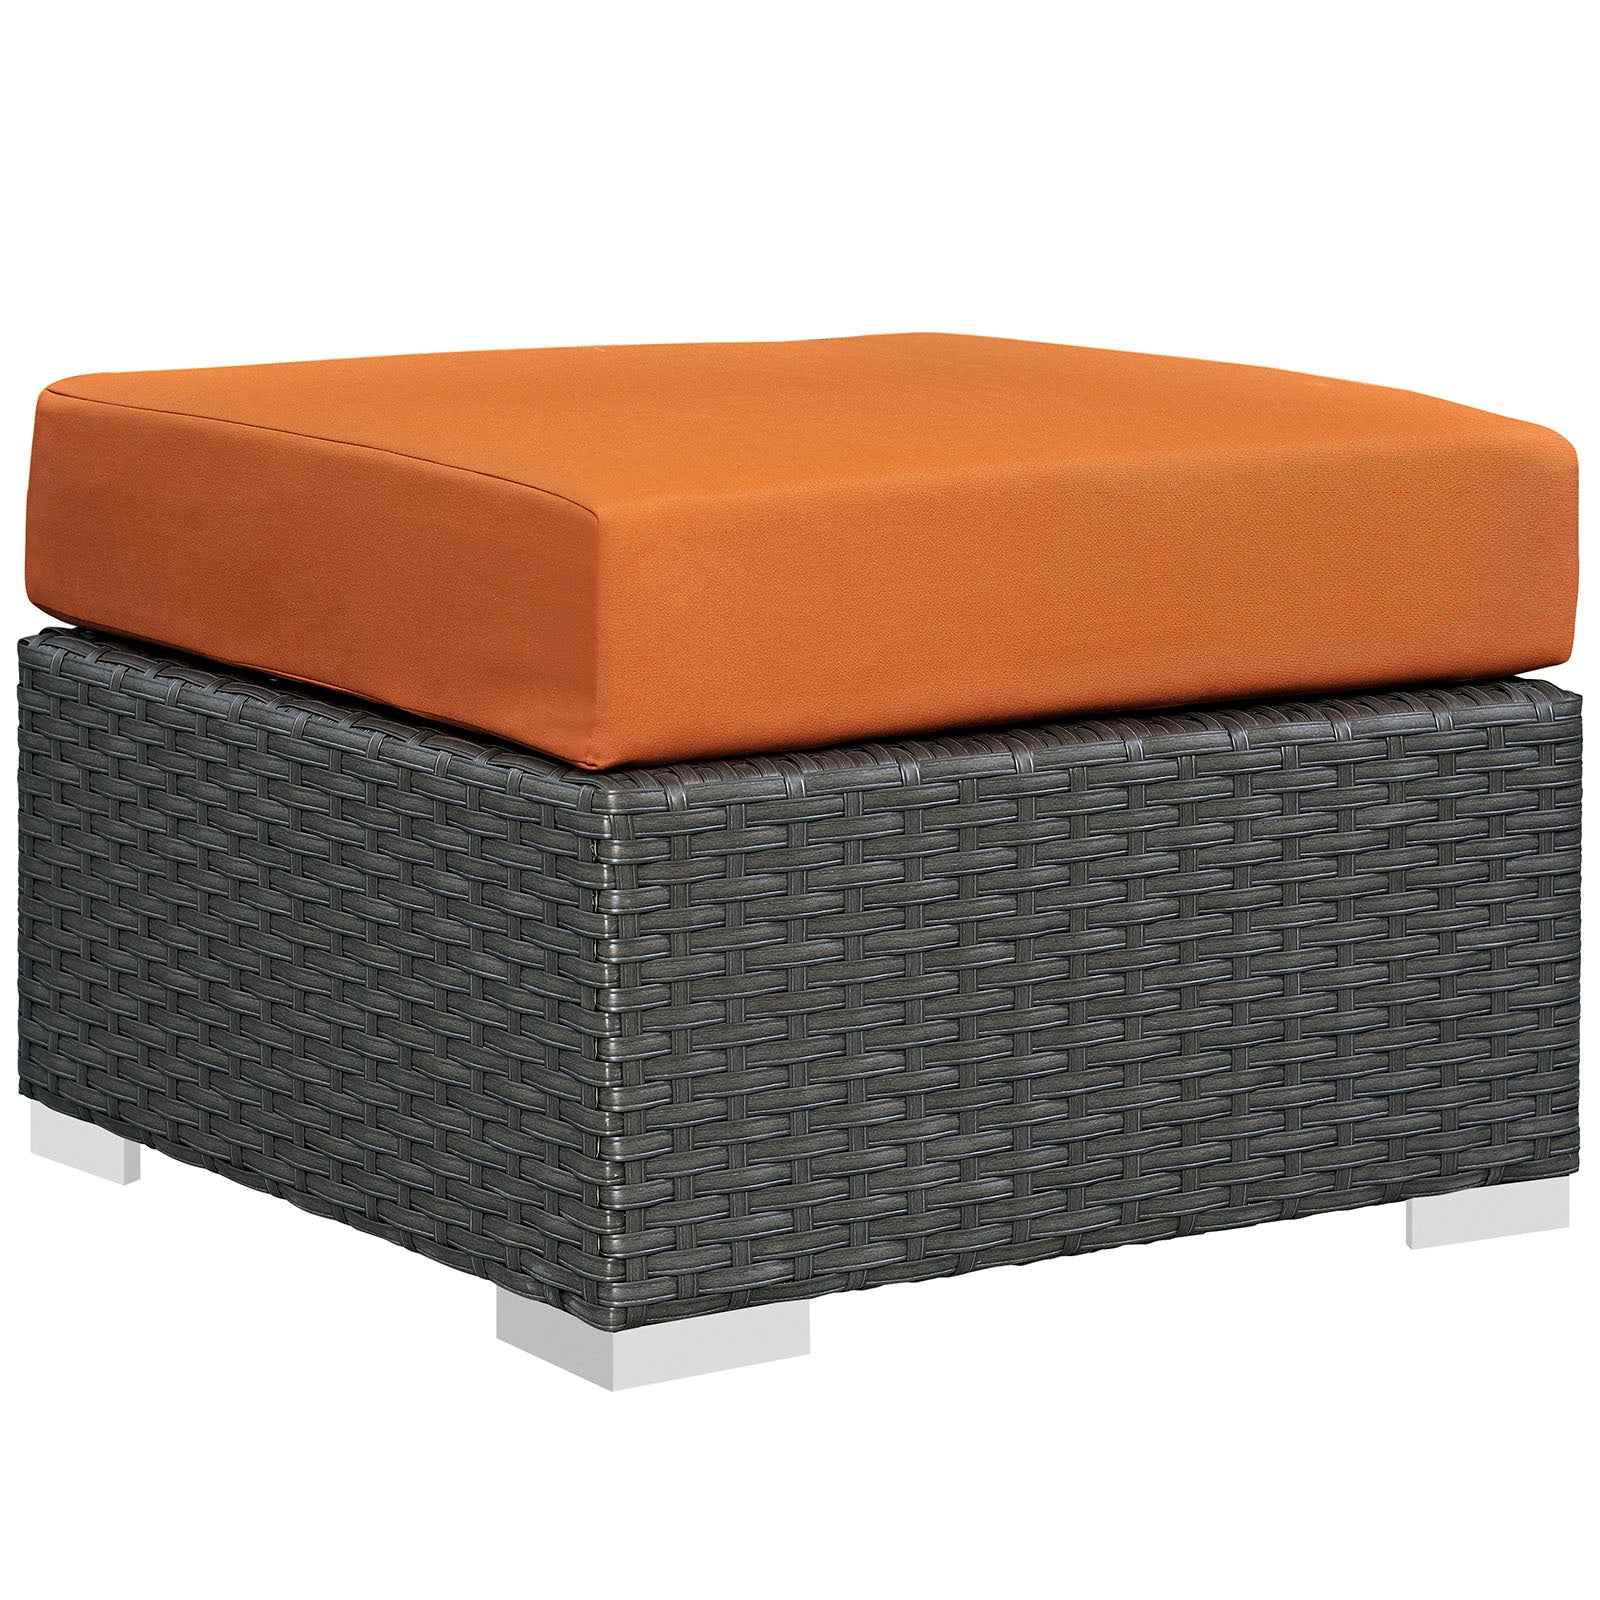 Modway Outdoor Stools & Benches - Sojourn Outdoor Patio Sunbrella Ottoman Canvas Tuscan